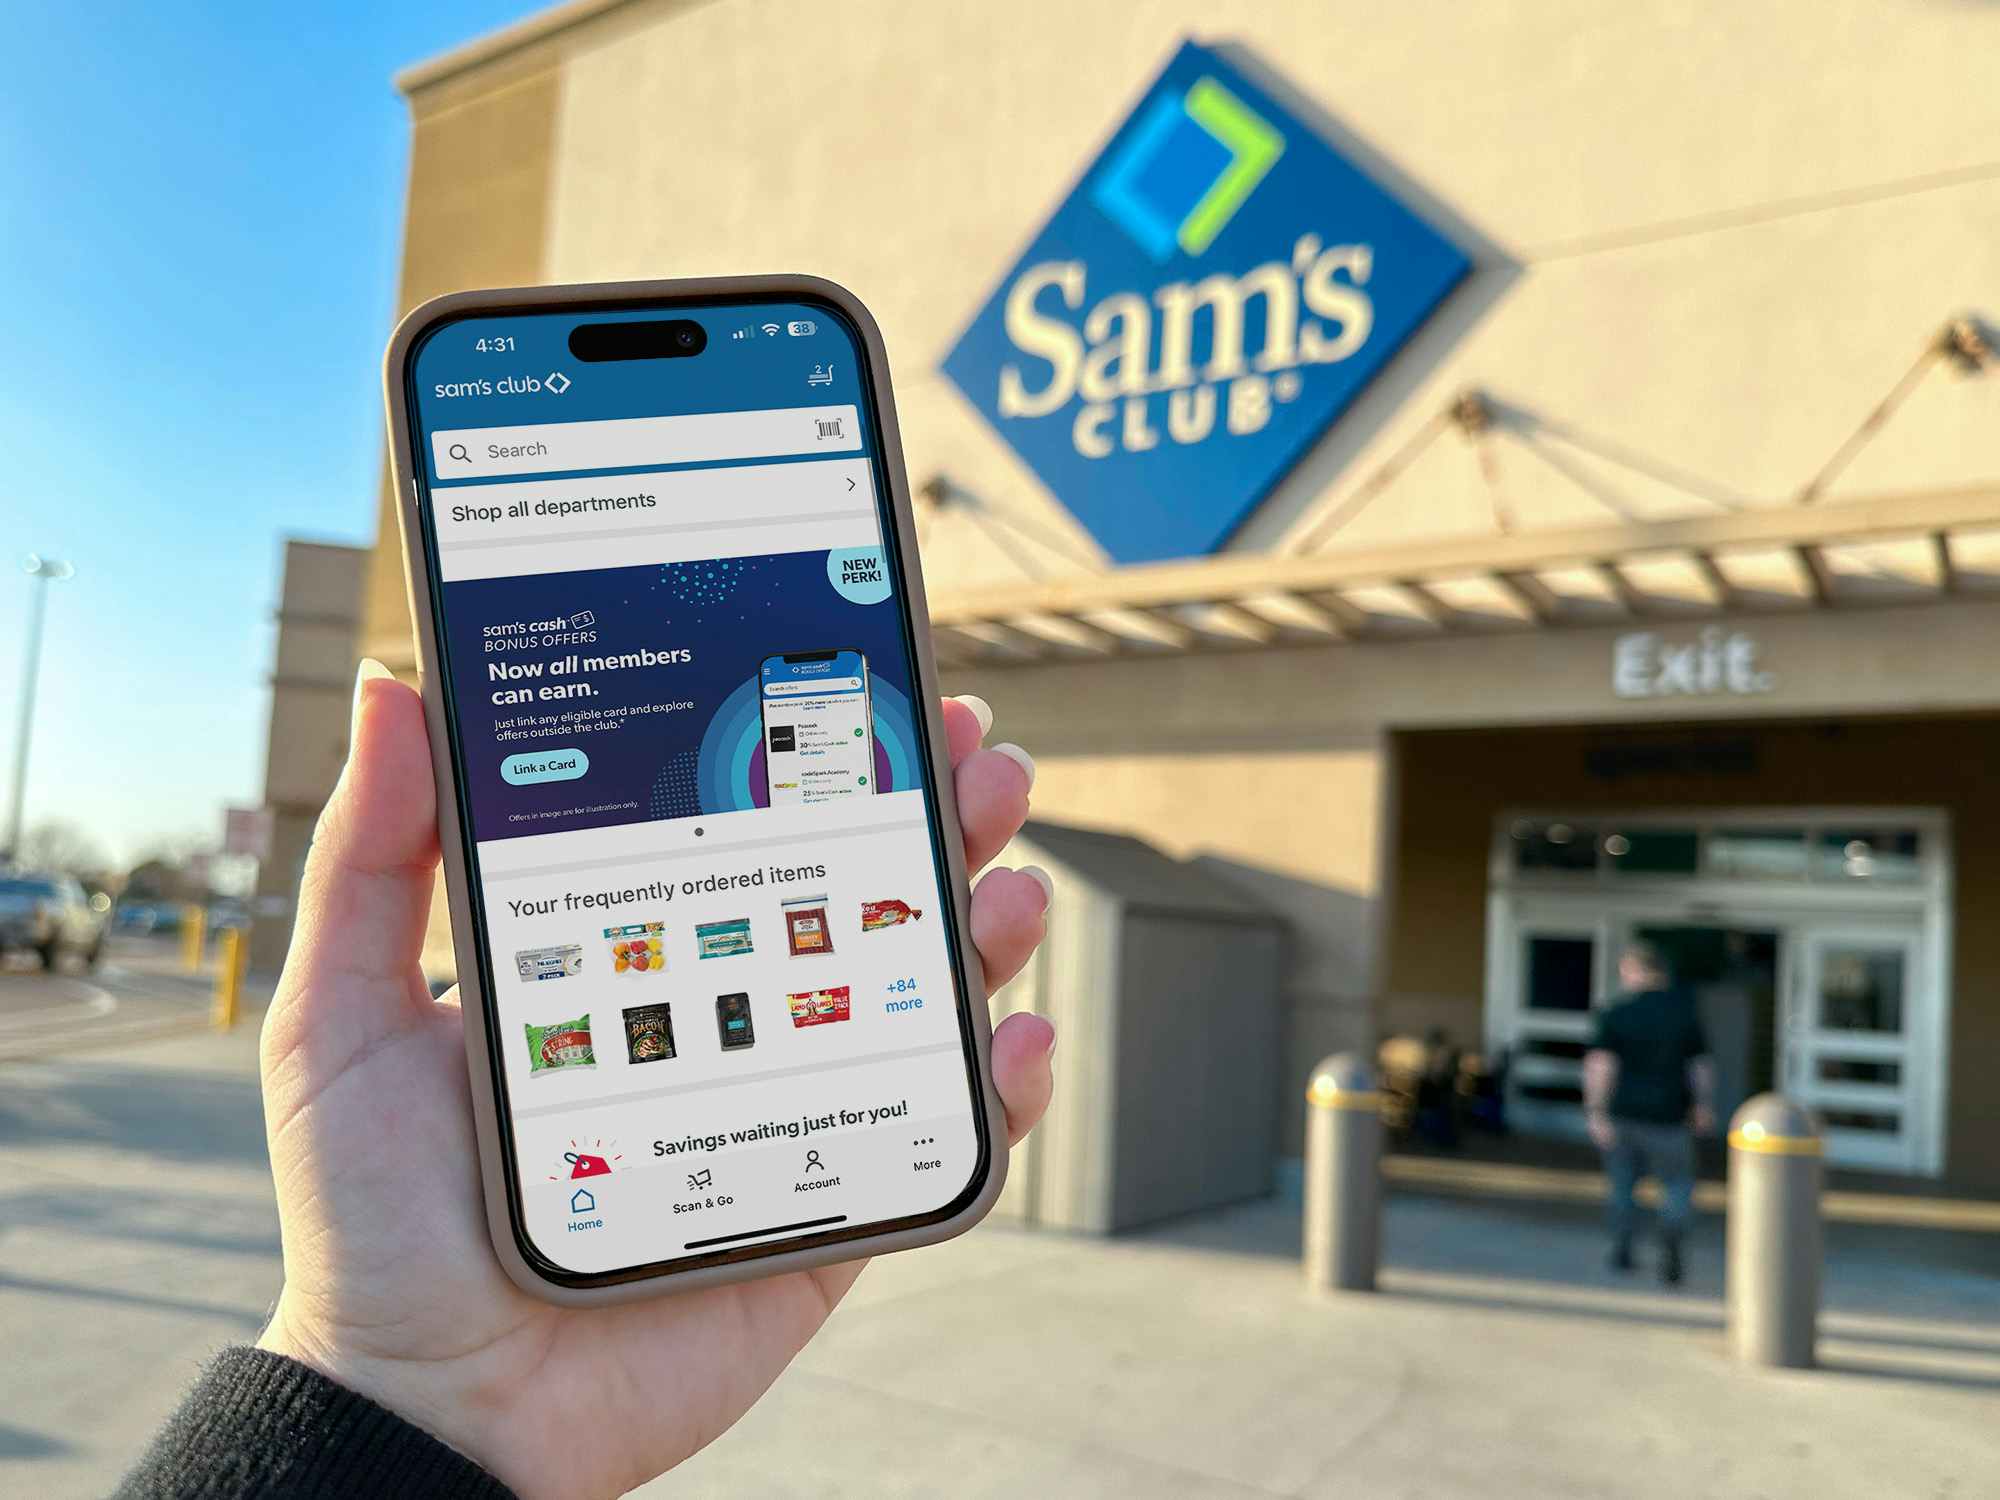 Get a 1-Year Sam's Club Membership for Only $14 — Save 72%